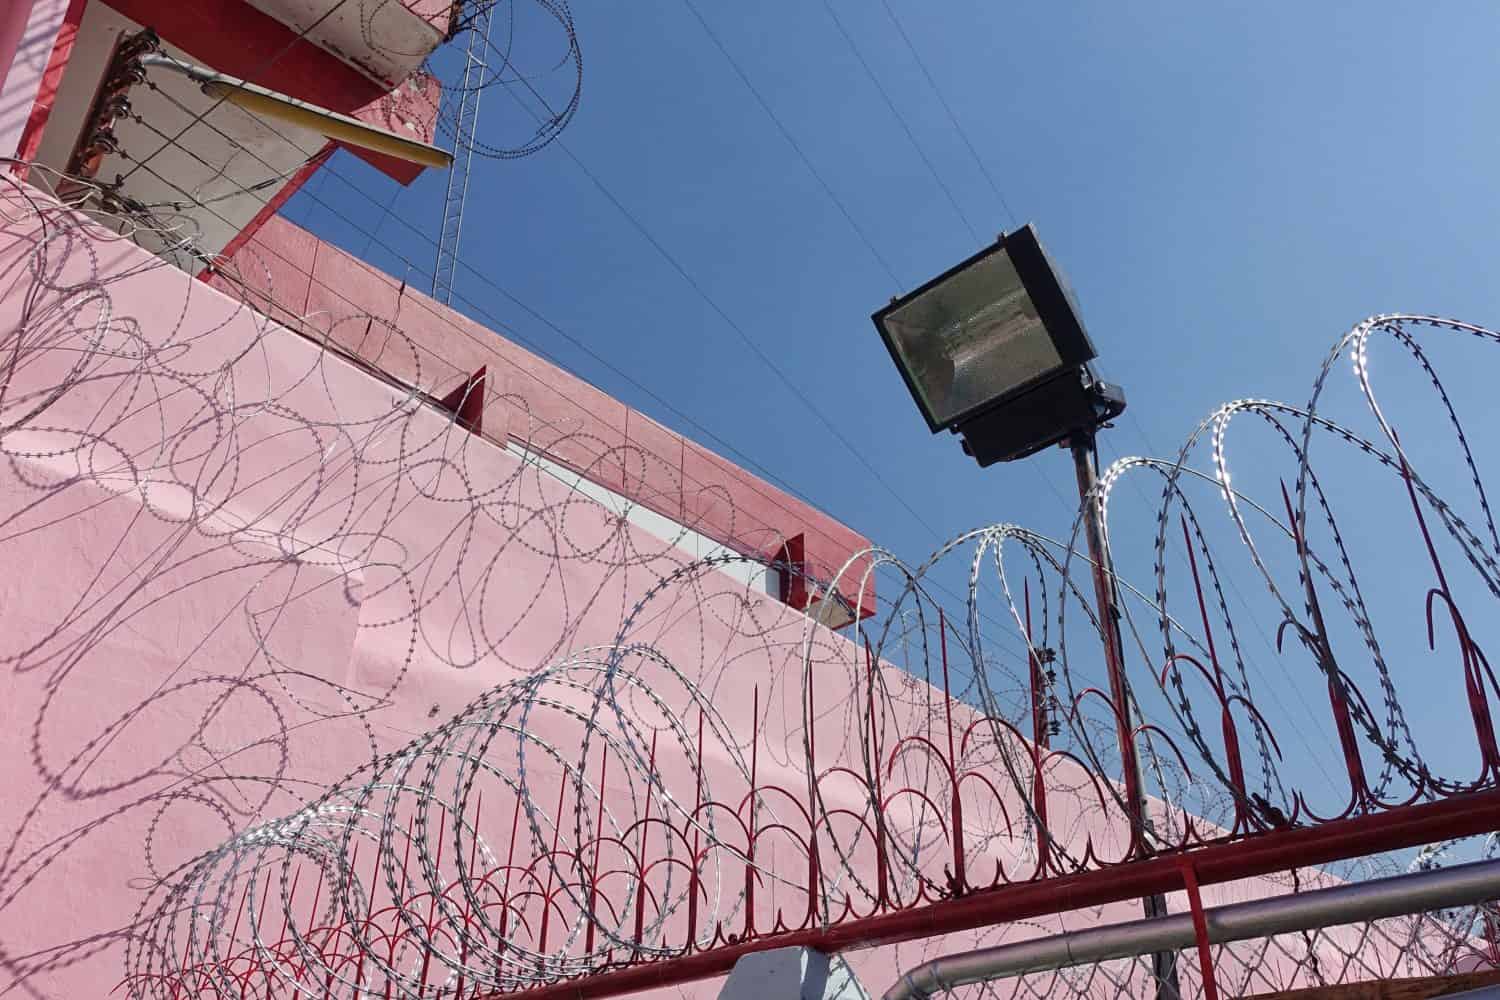 the pink and red prison walls of female prison building with high walls and barbed iron wire.